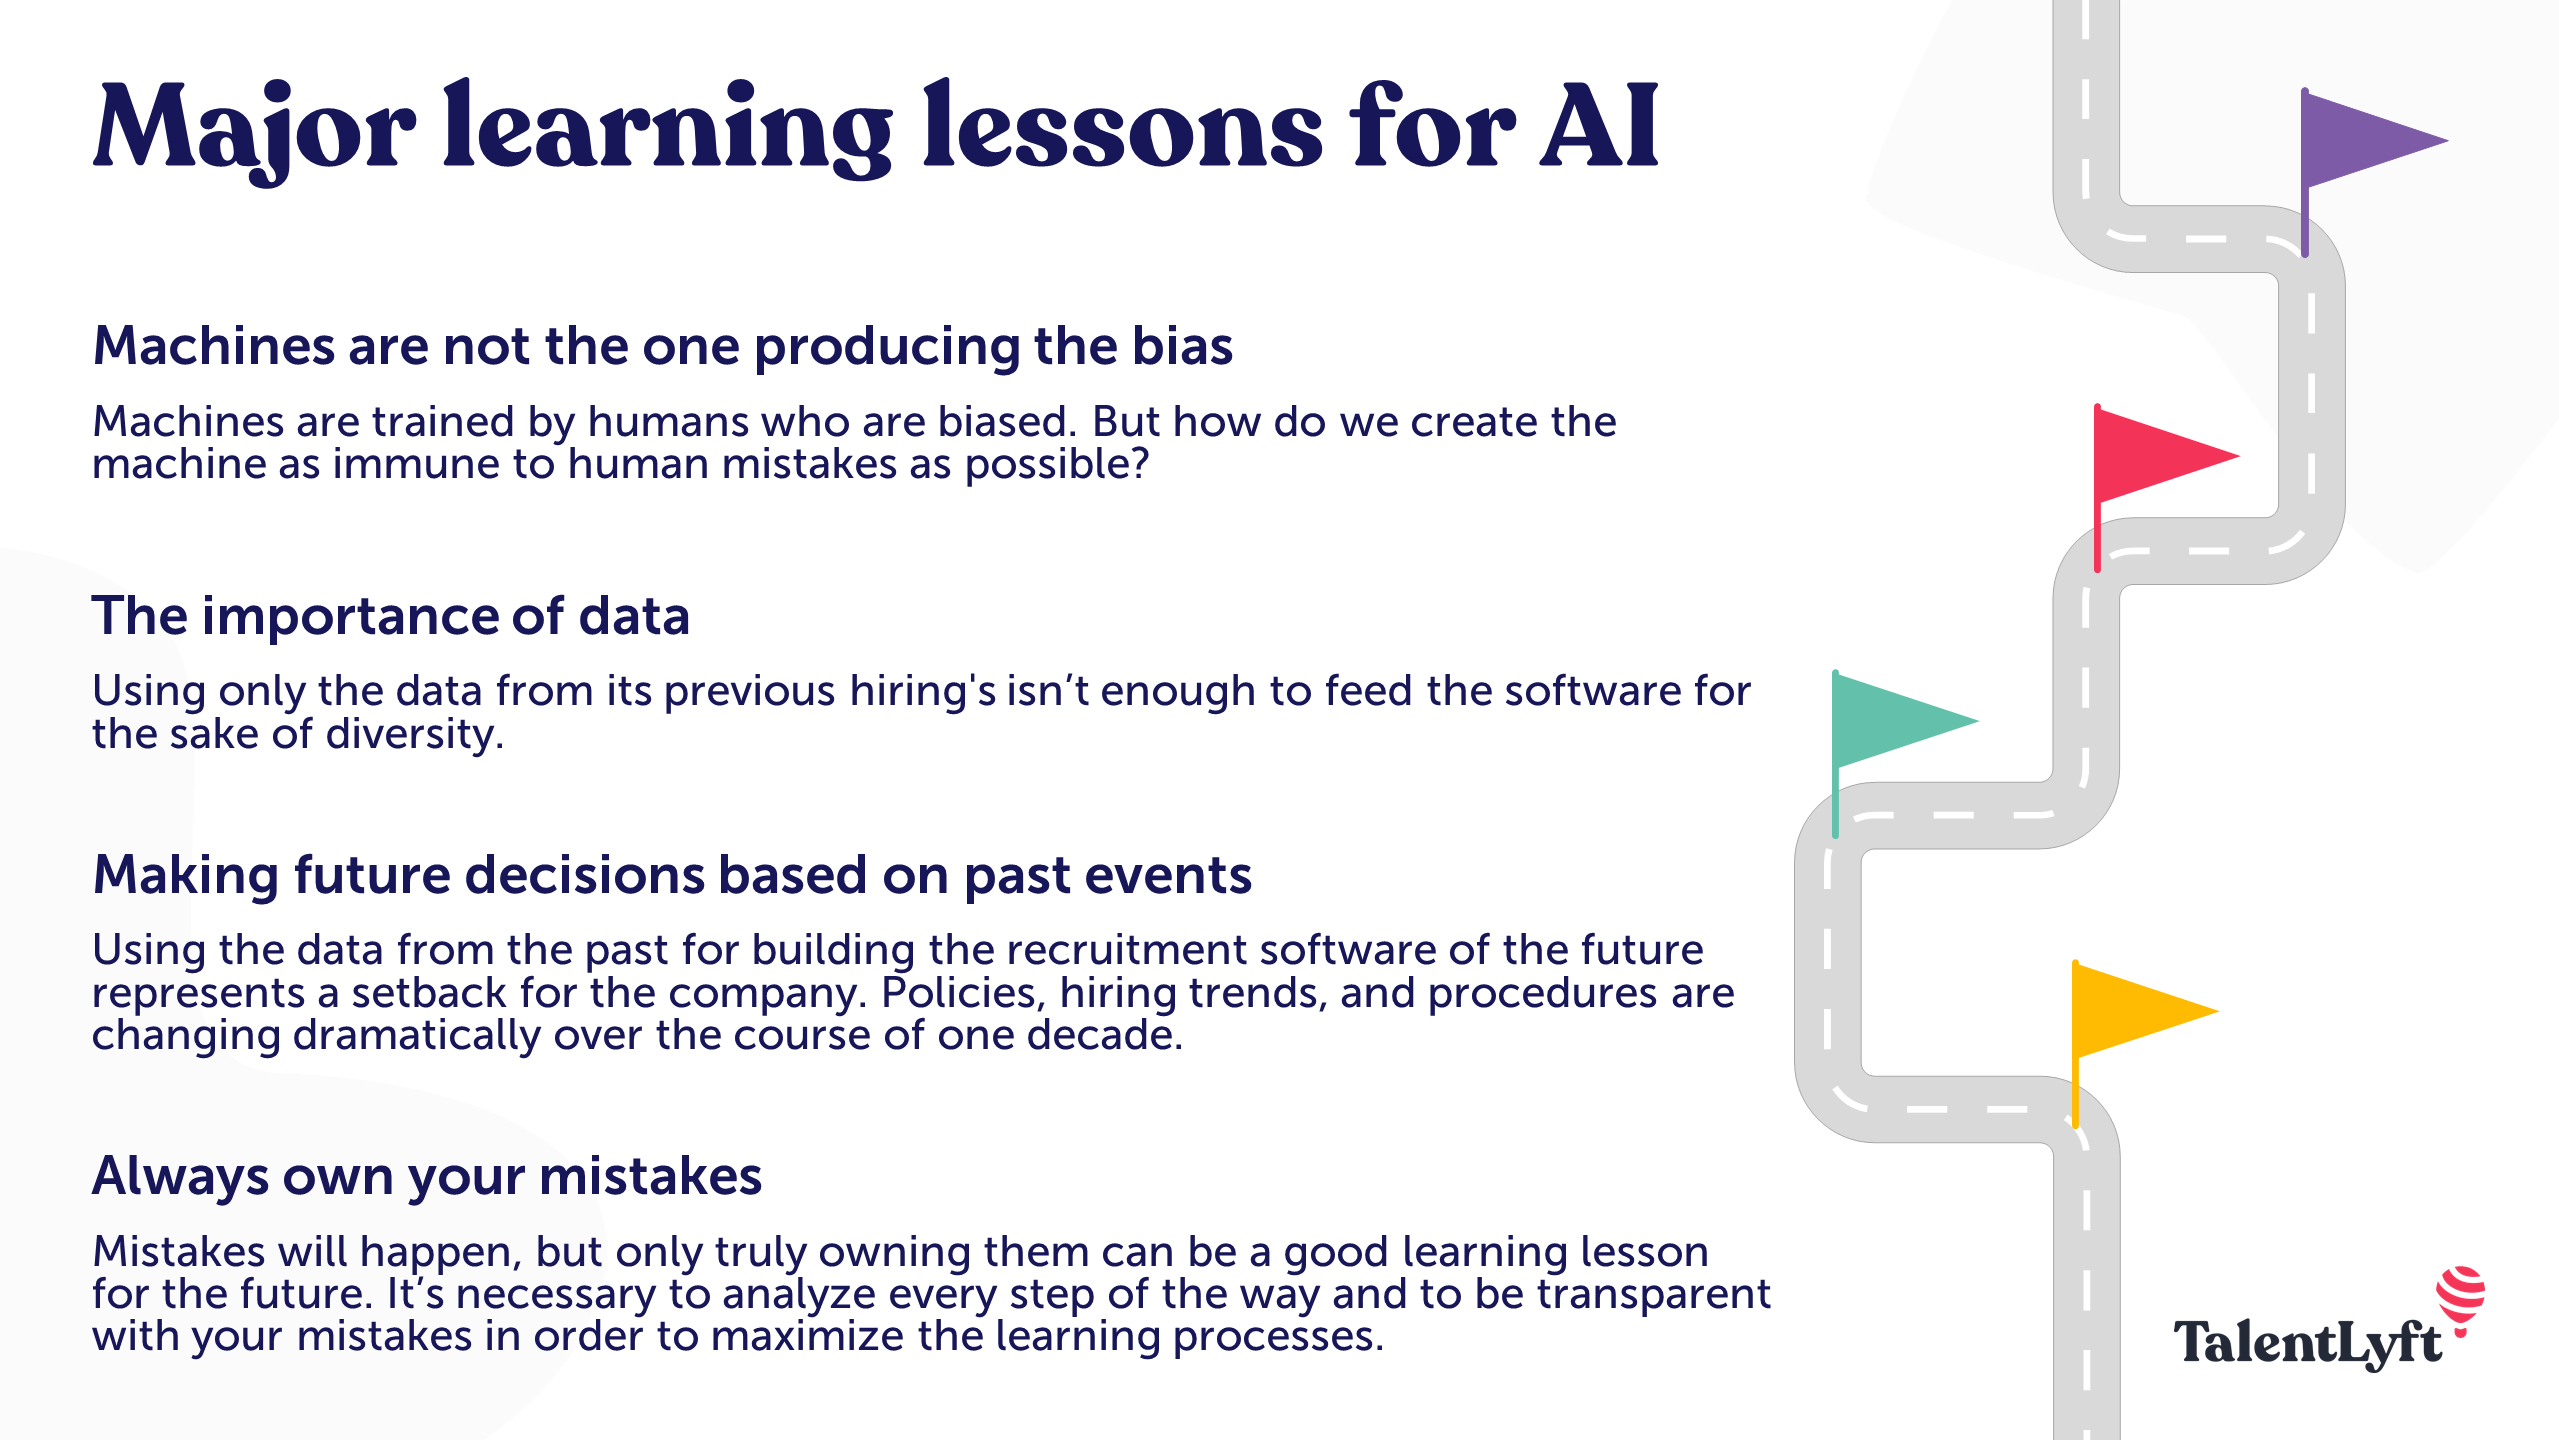 Learning lessons for AI in recruitment